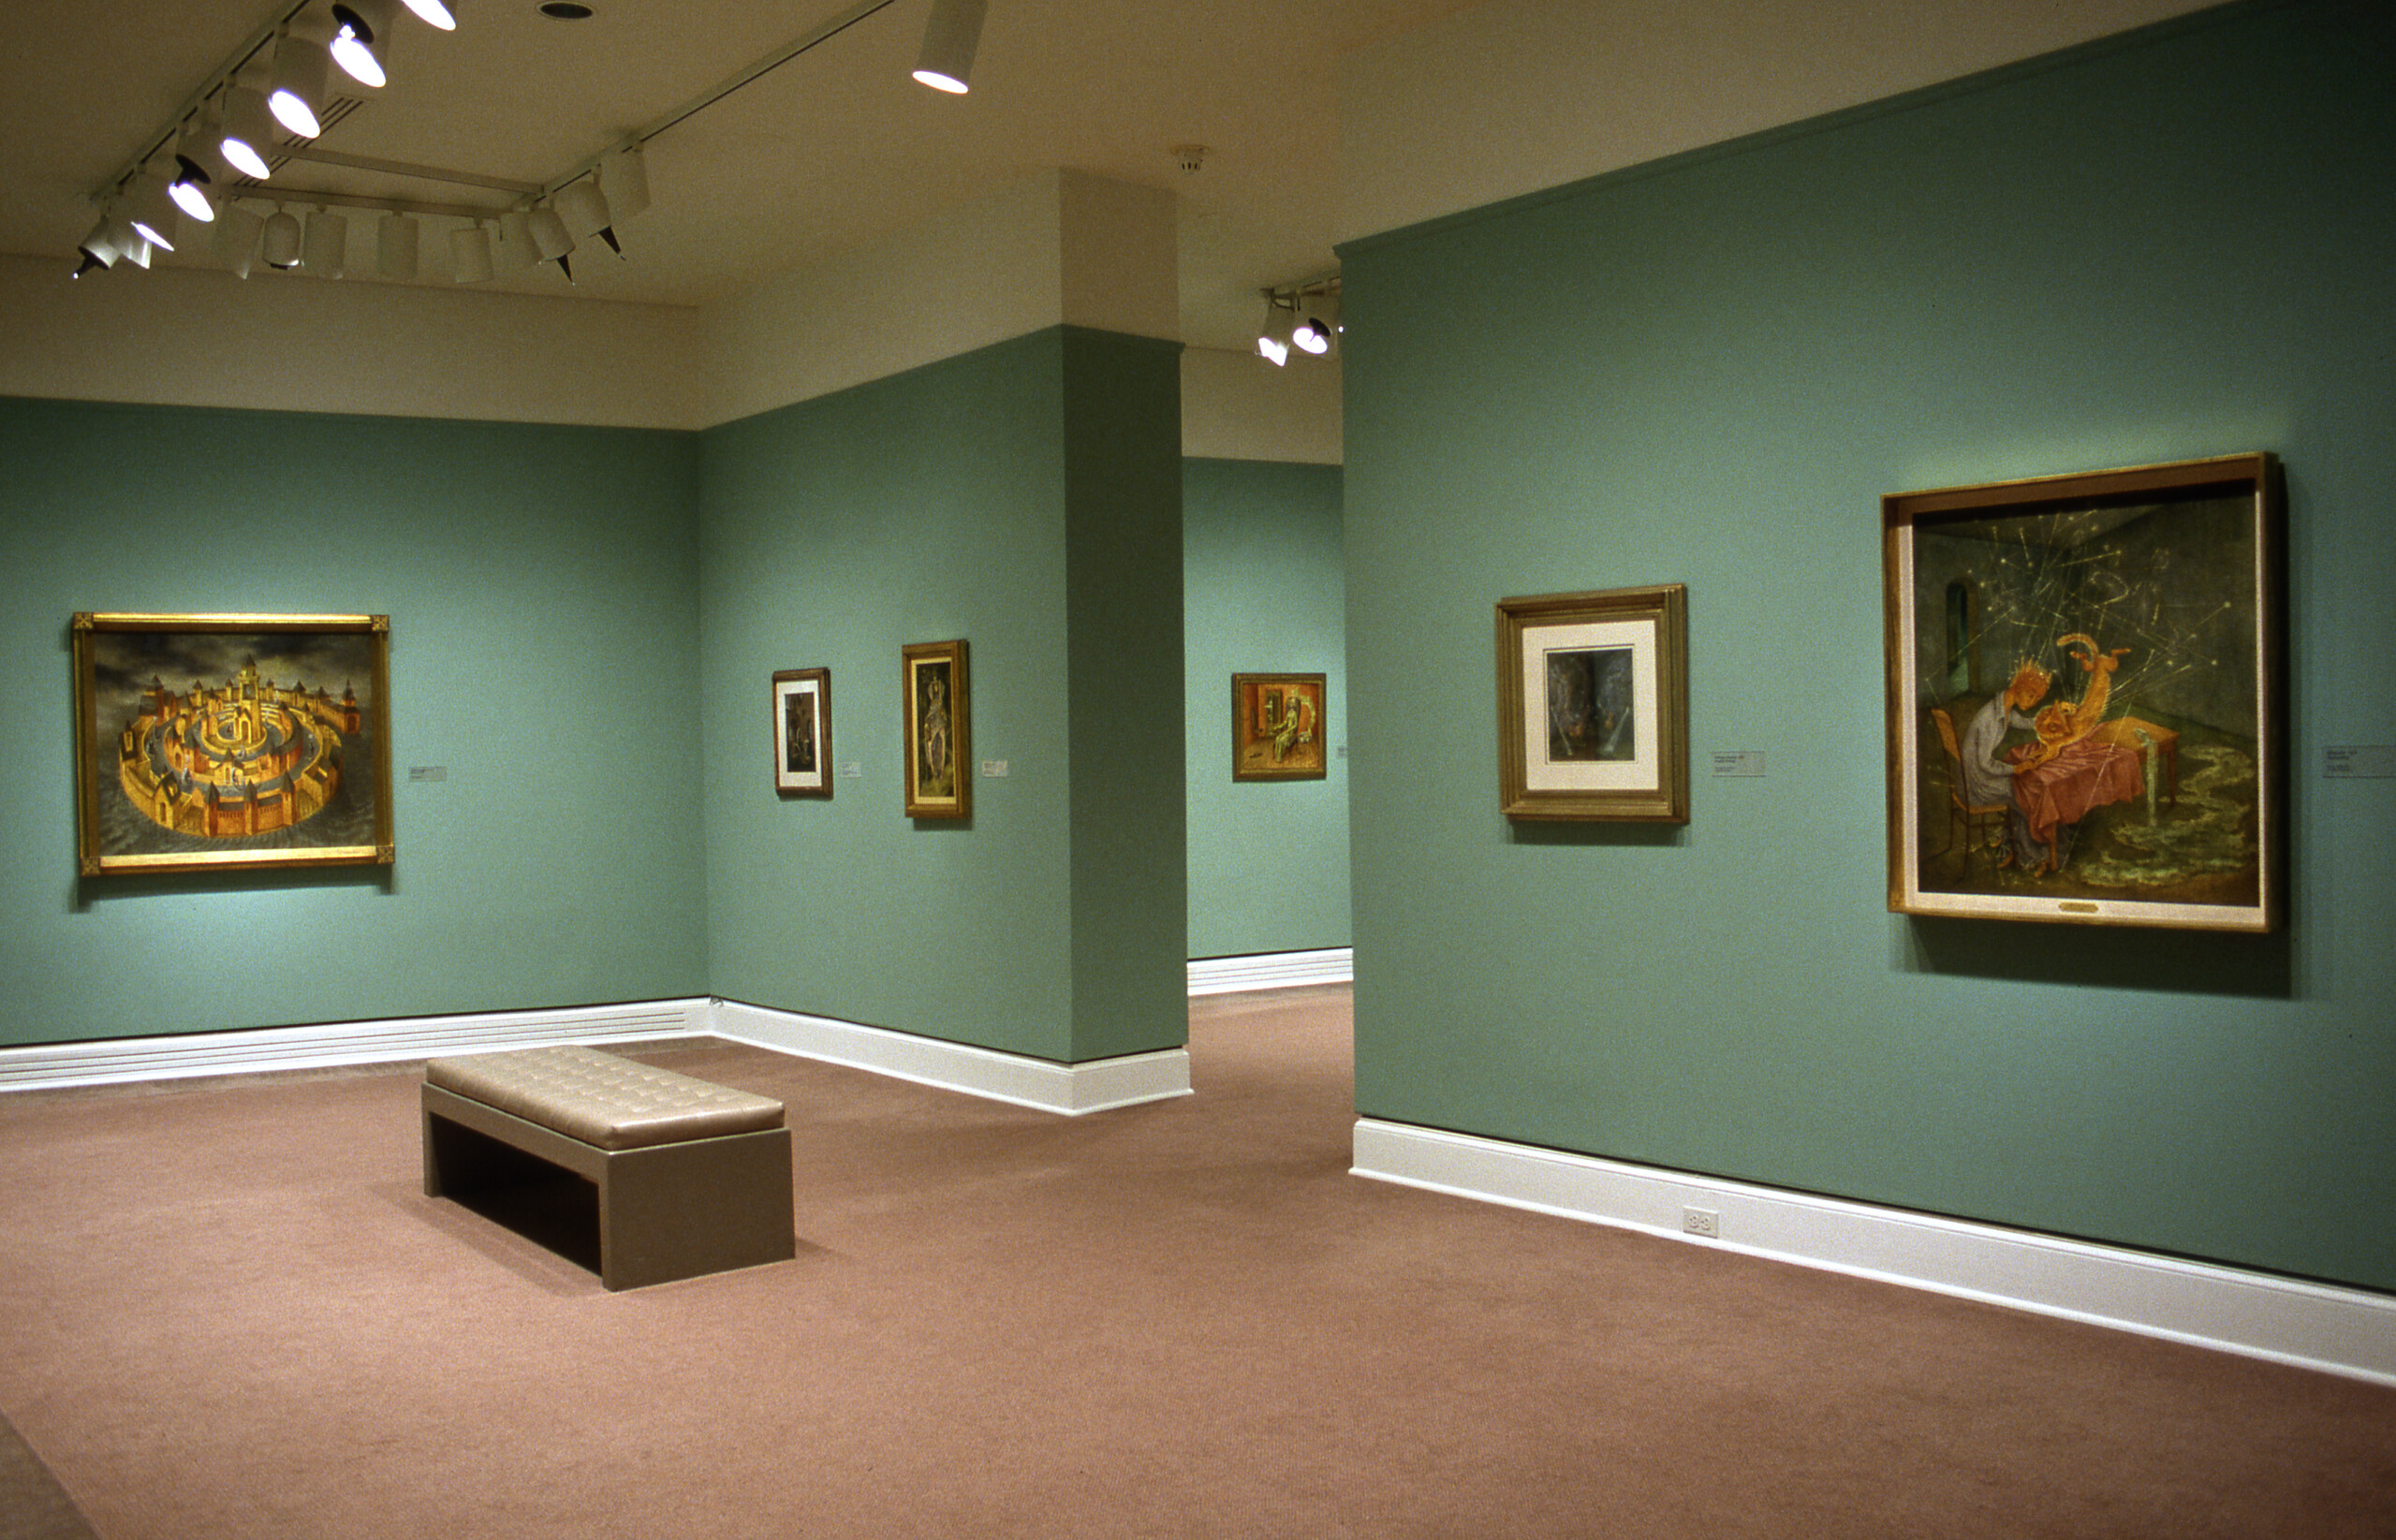 A view of an exhibition space with blue walls. Several paintings are hanging on the walls, depicting surreal scenes.